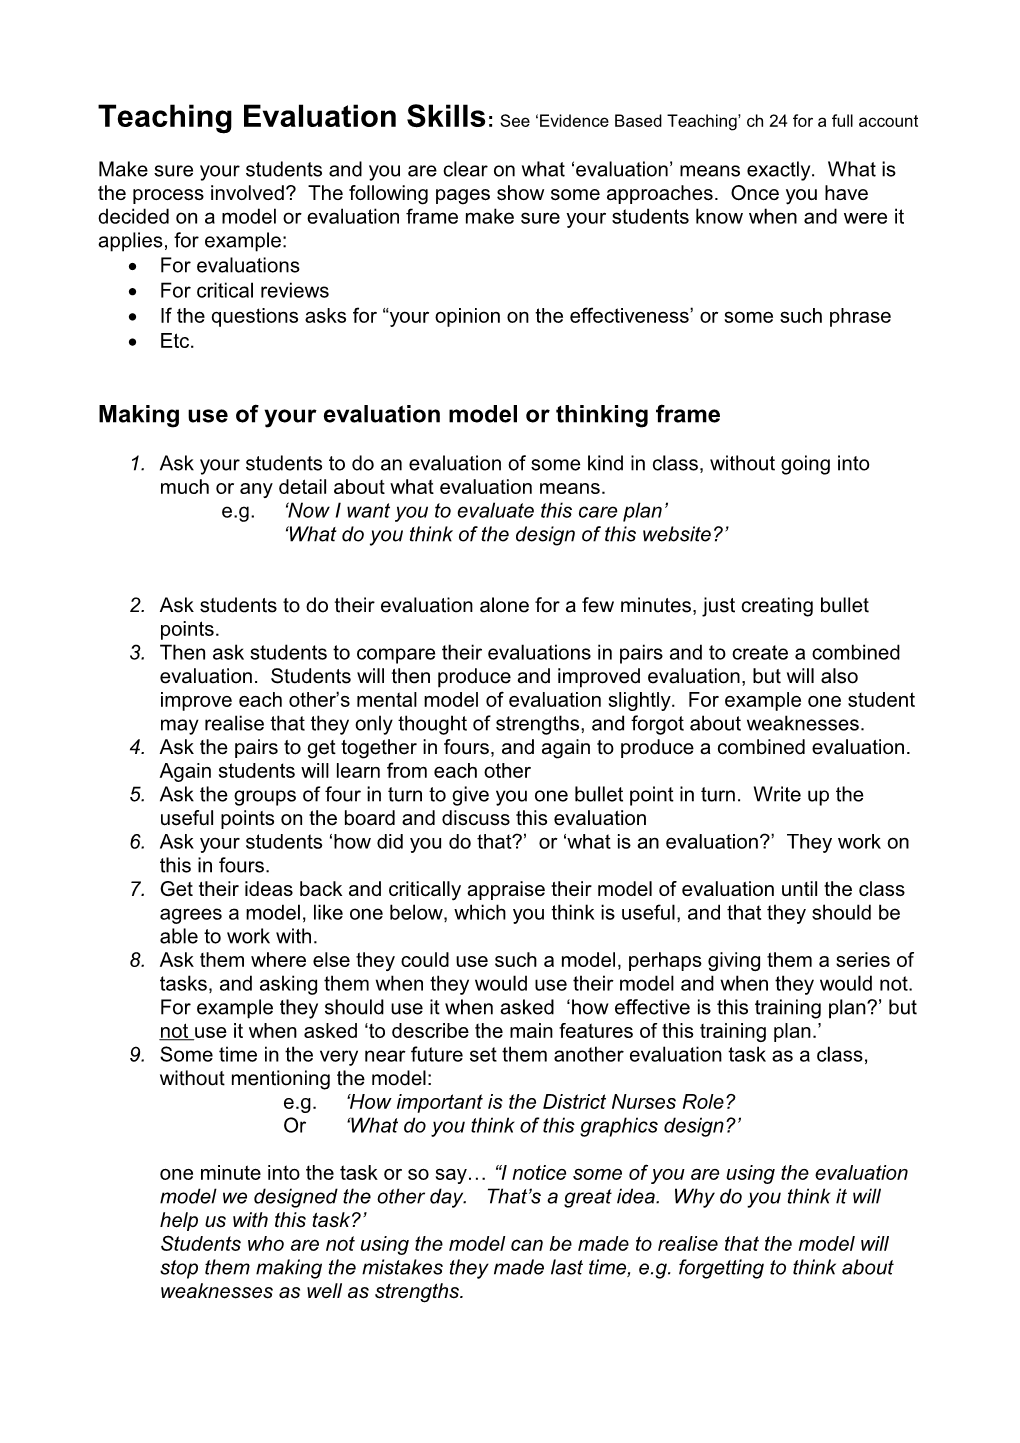 Teaching Students to Evaluate